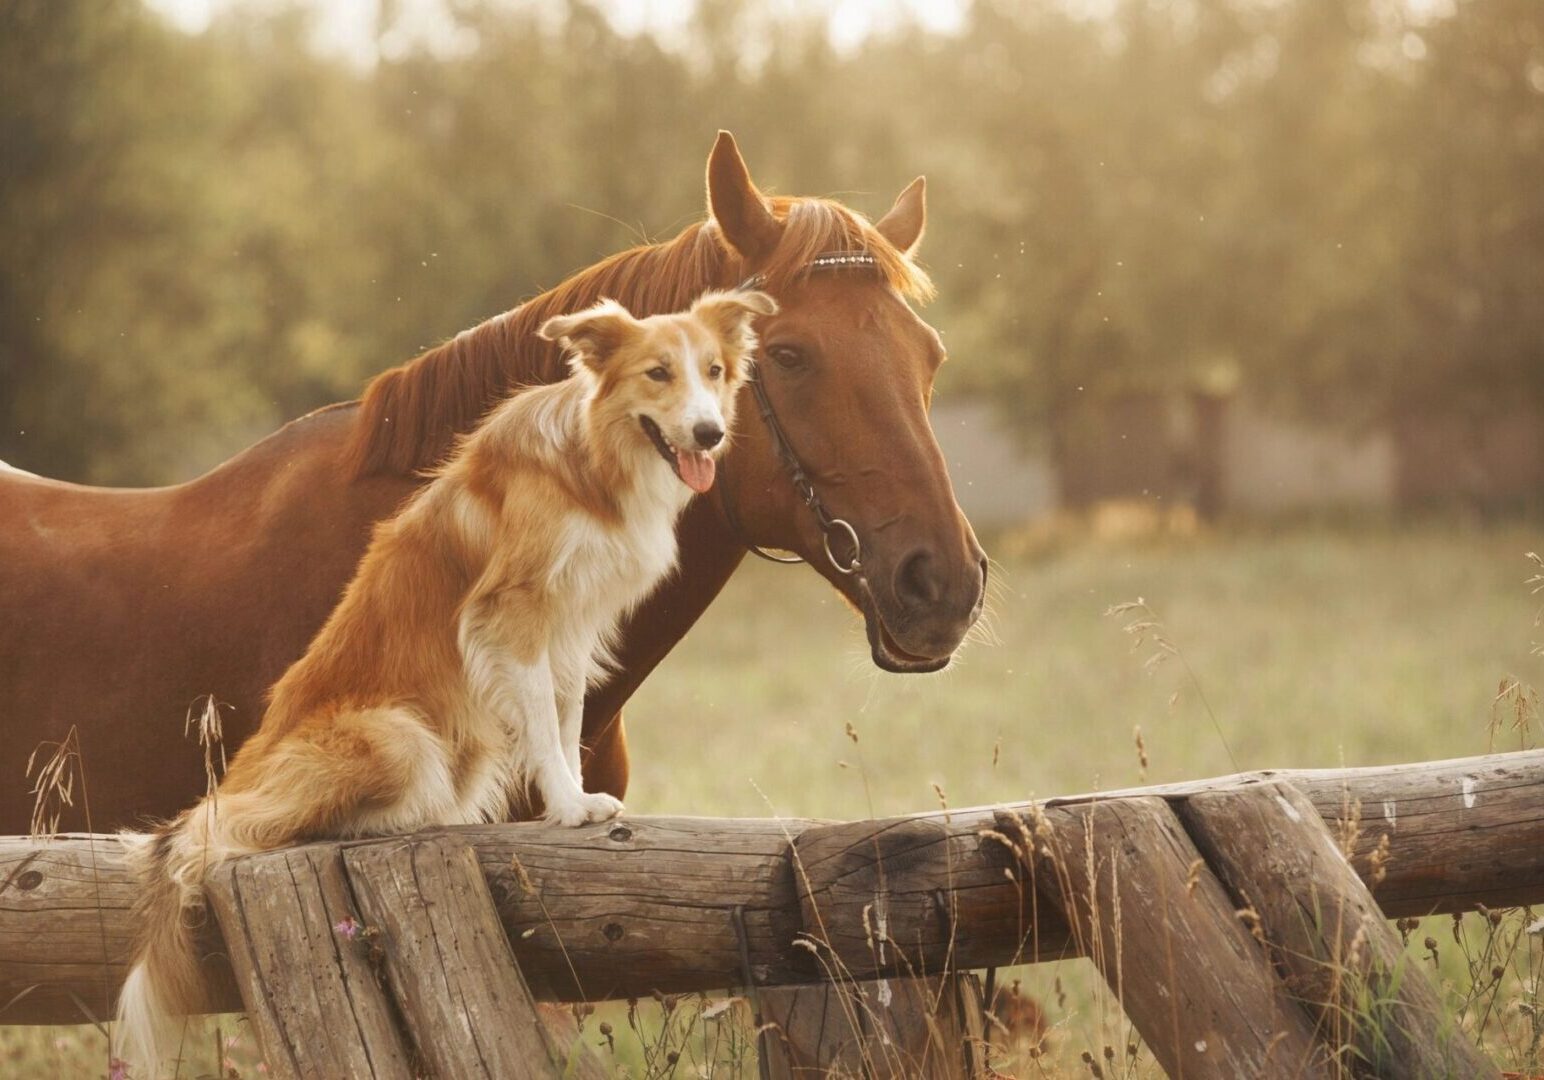 A horse and a dog